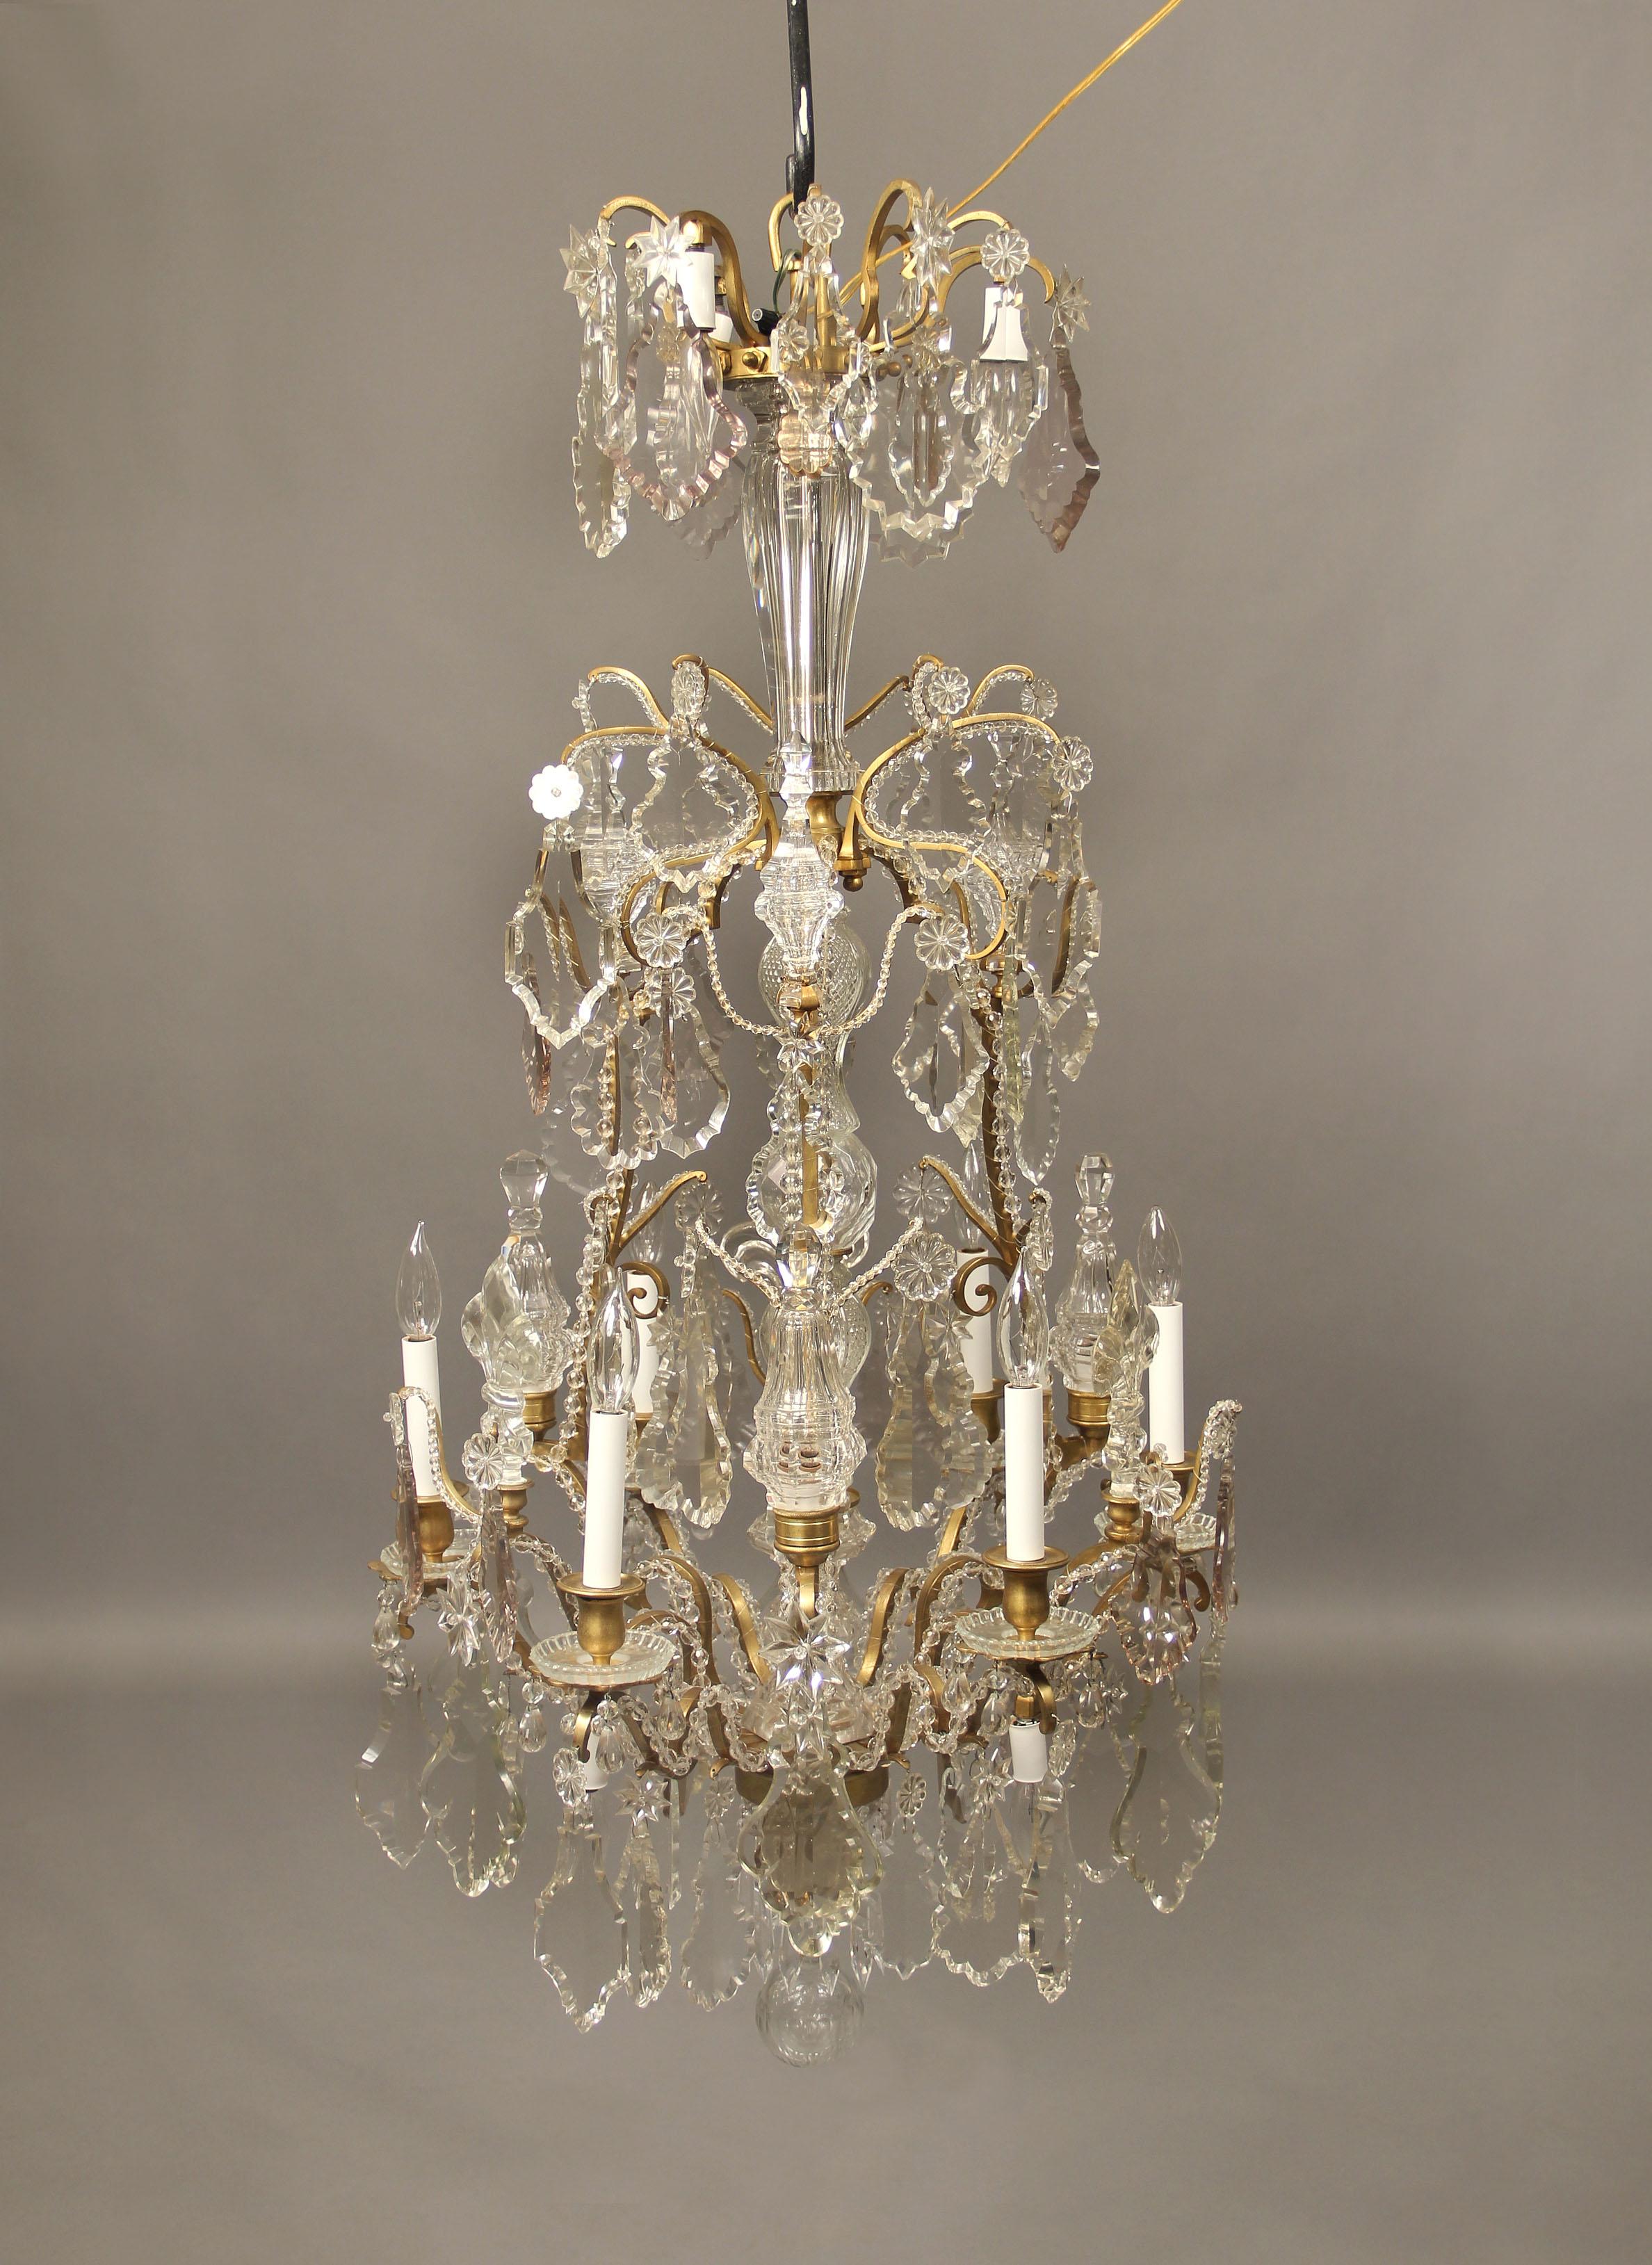 An elegant late 19th century gilt bronze and baccarat crystal fifteen-light chandelier

Multifaceted and shaped crystal, beaded arms, cut crystal central column, six spears, three that are lit and are part of the nine perimeter lights, six-tiered